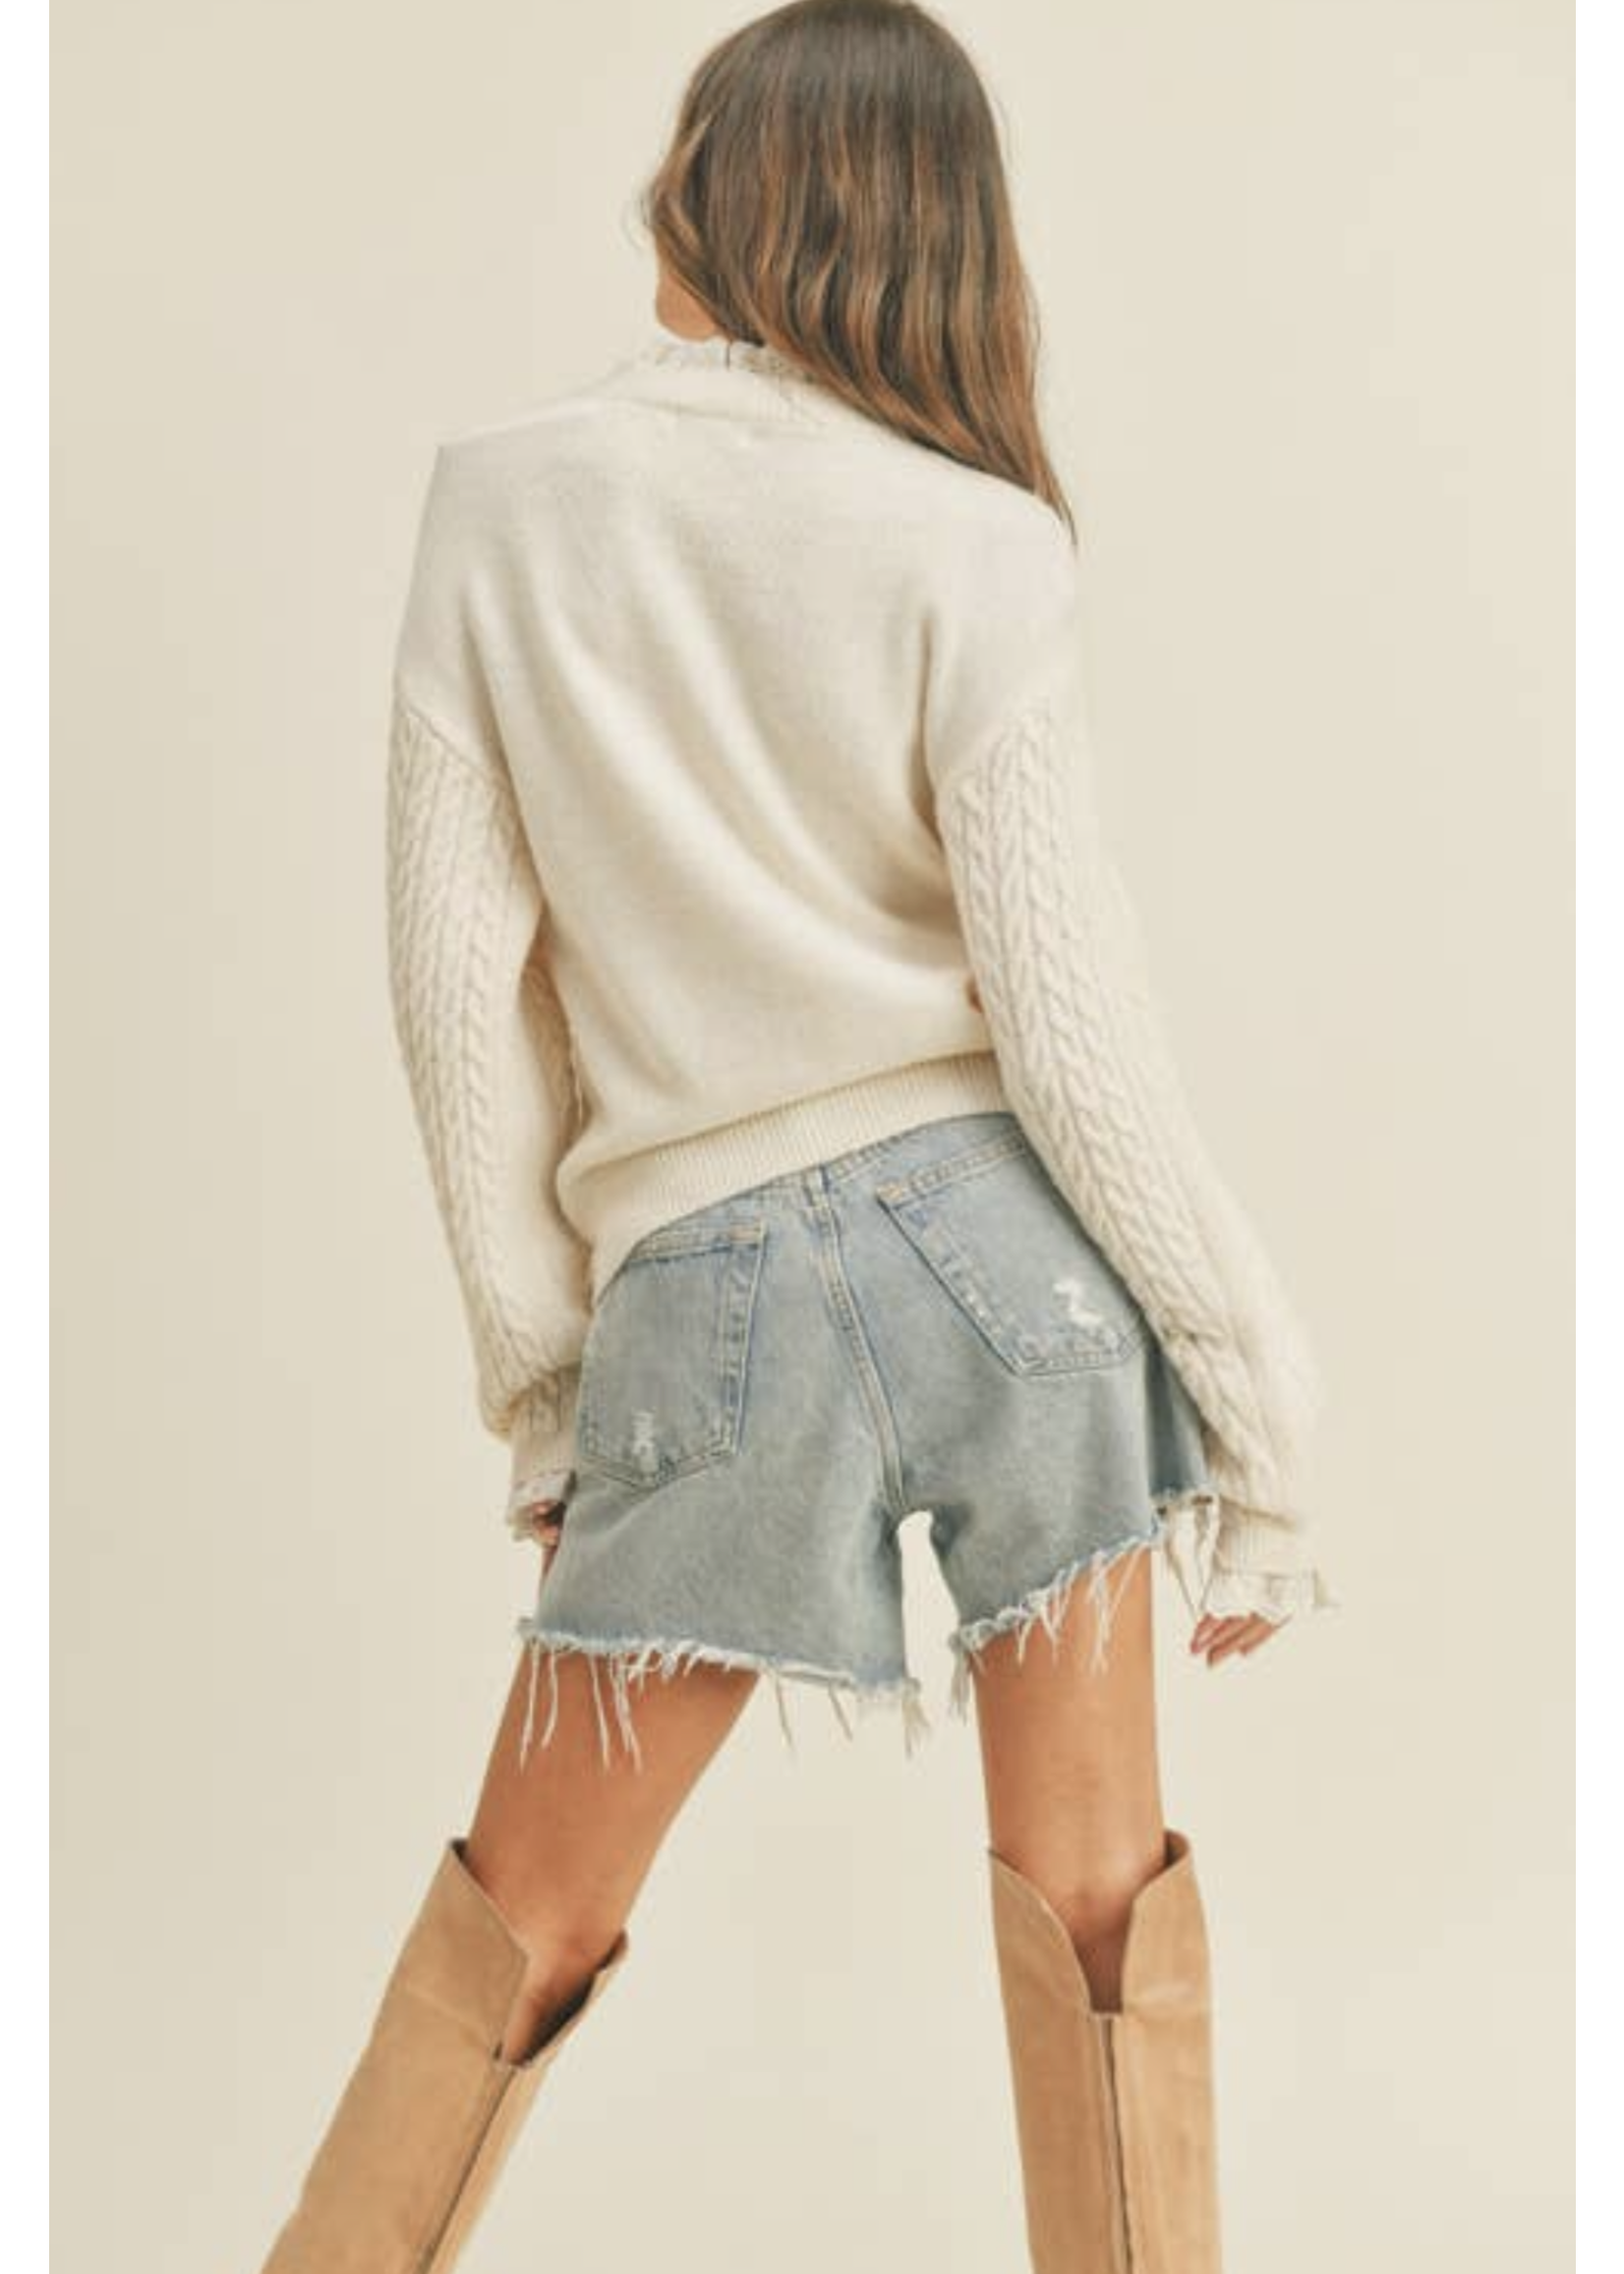 Cream Knit with Lace Detail Sweater